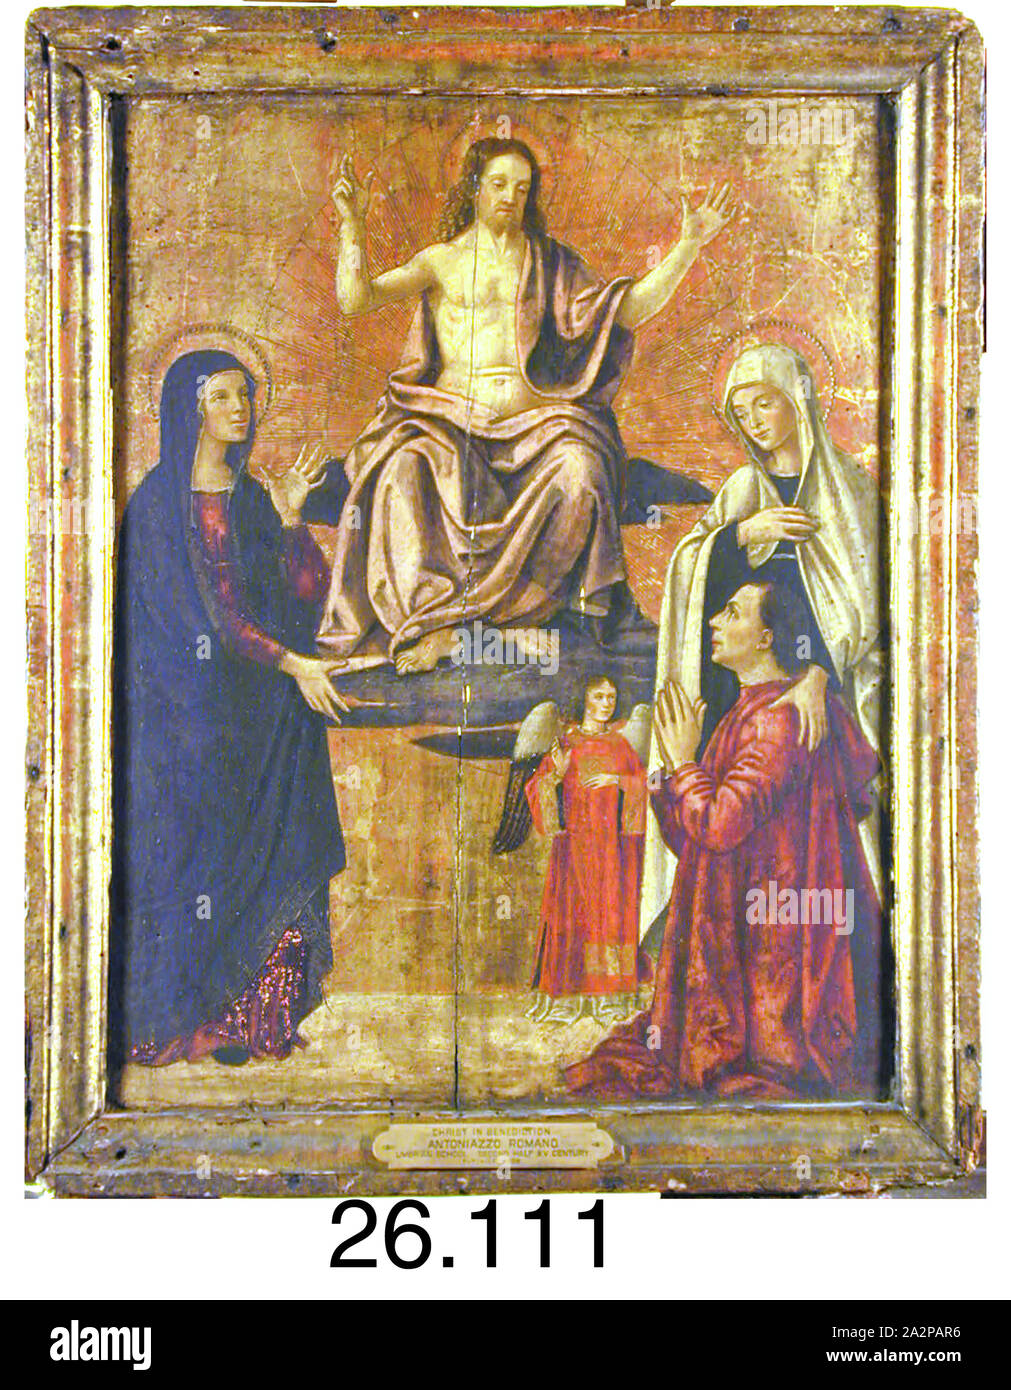 Antoniazzo Romano, Italian, Christ Enthroned, the Virgin, Saint Francesca Romana, an Angel and Donor, 1470/1475, tempera on wood panel, Over all: 20 7/8 x 16 1/8 x 2 3/8 in (53 x 43.5 x 6.0 cm Stock Photo